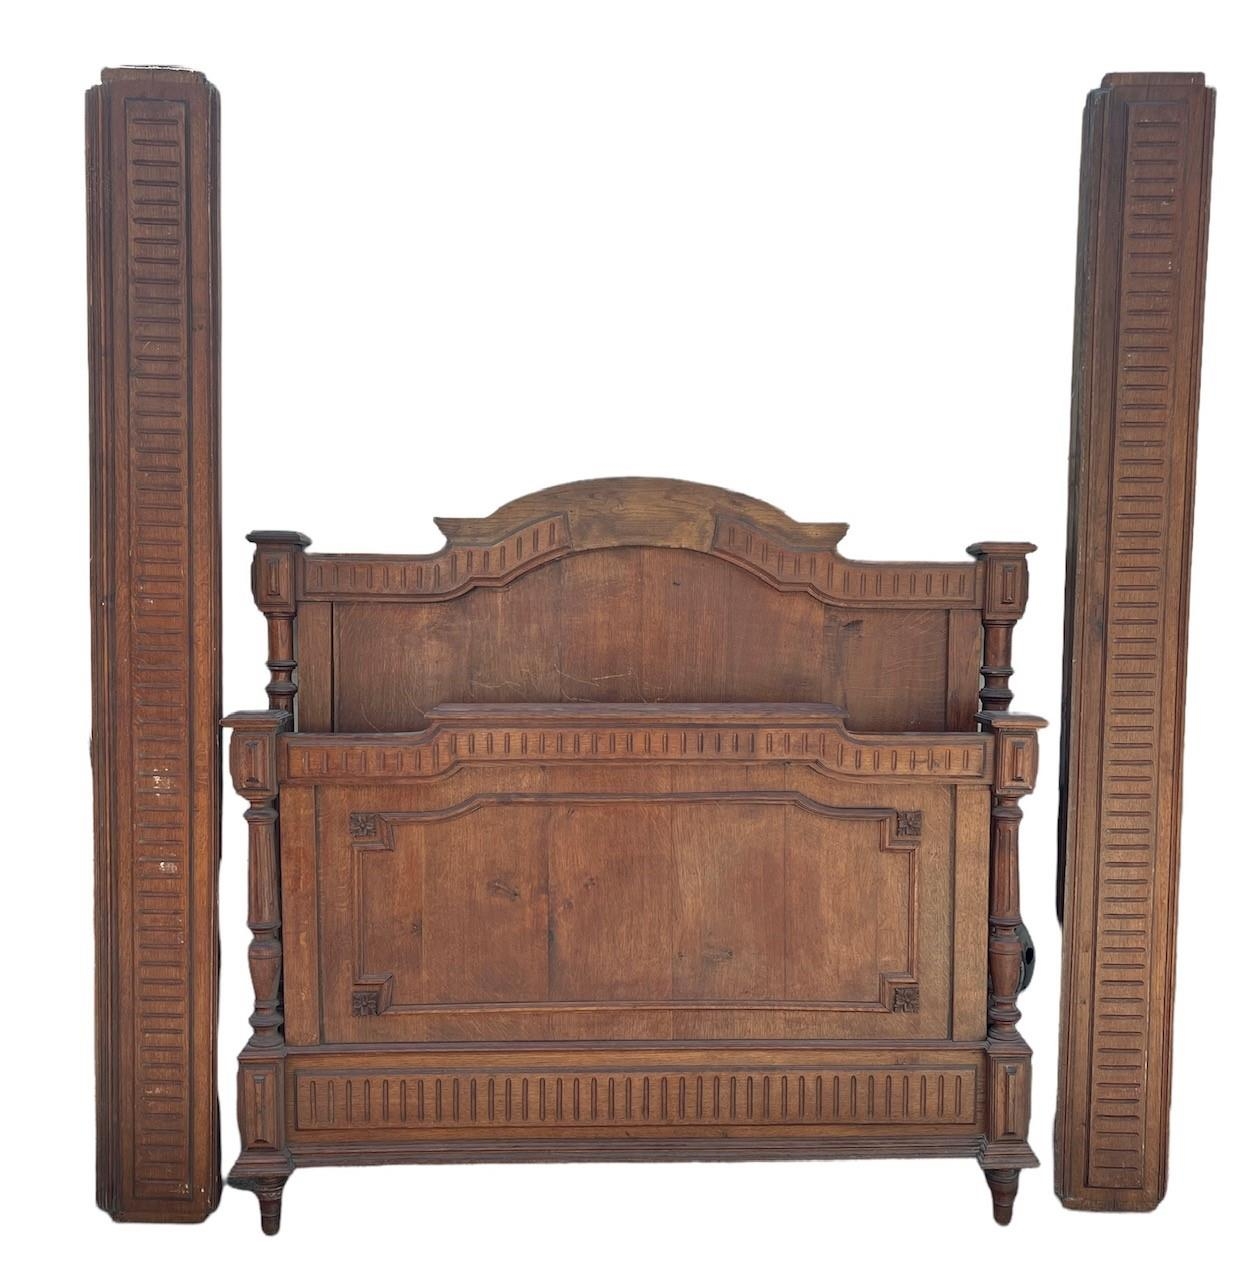 A 19TH CENTURY FRENCH CARVED OAK DOUBLE BED. (h 131cm x w 141cm x length 216cm)